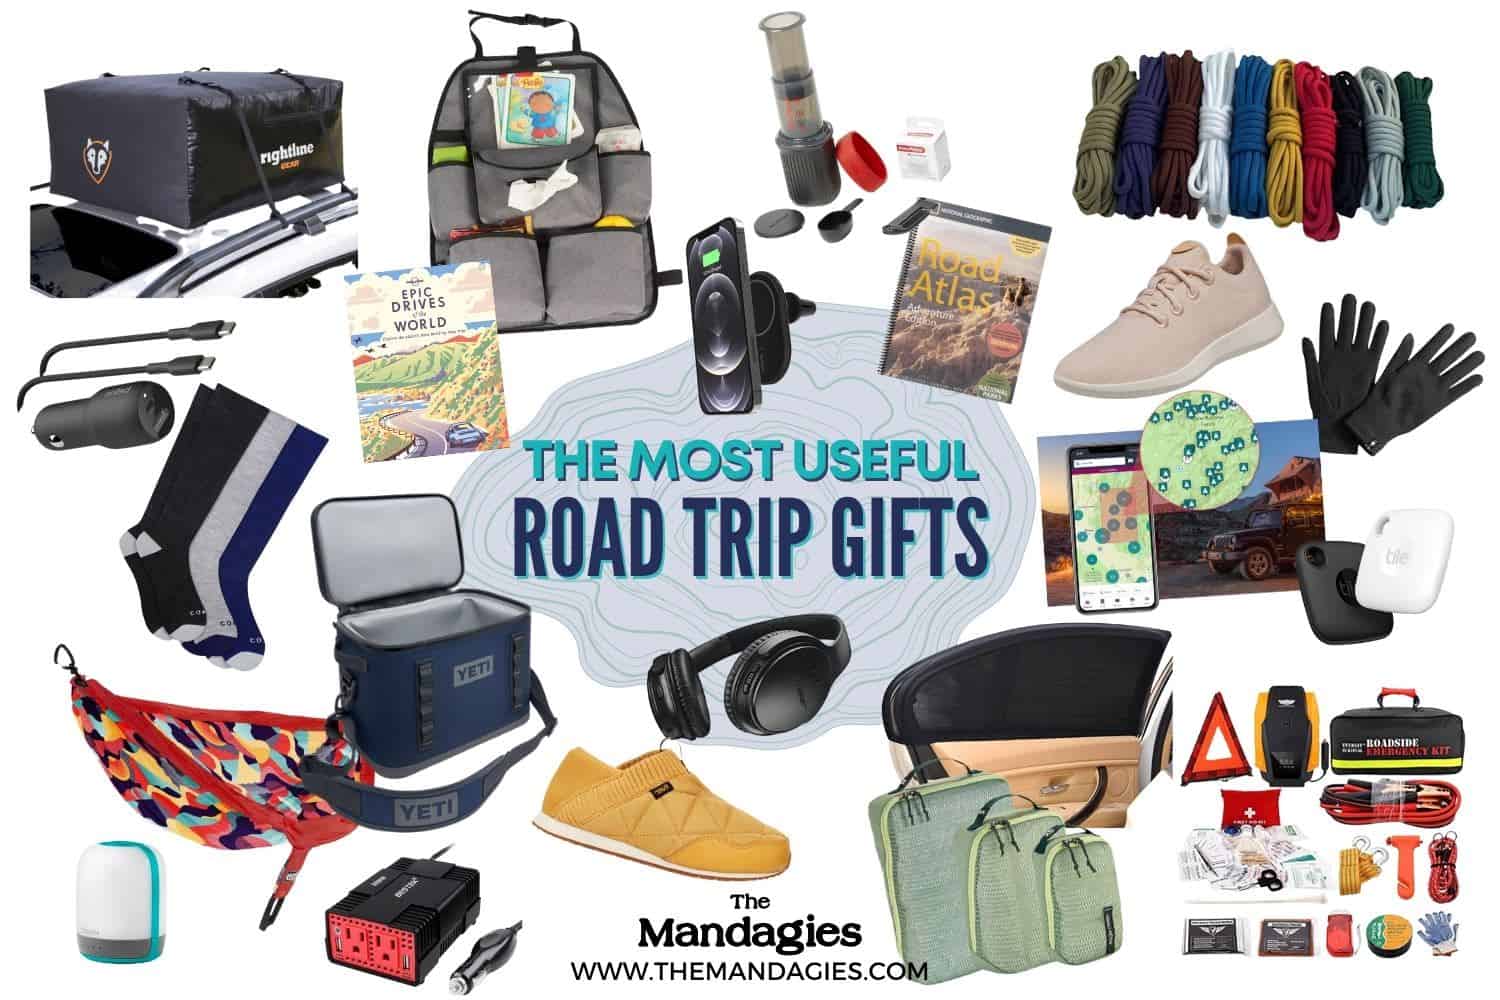 https://www.themandagies.com/wp-content/uploads/2021/08/Road-Trip-Gifts-Feature-Images-The-Mandagies.jpg